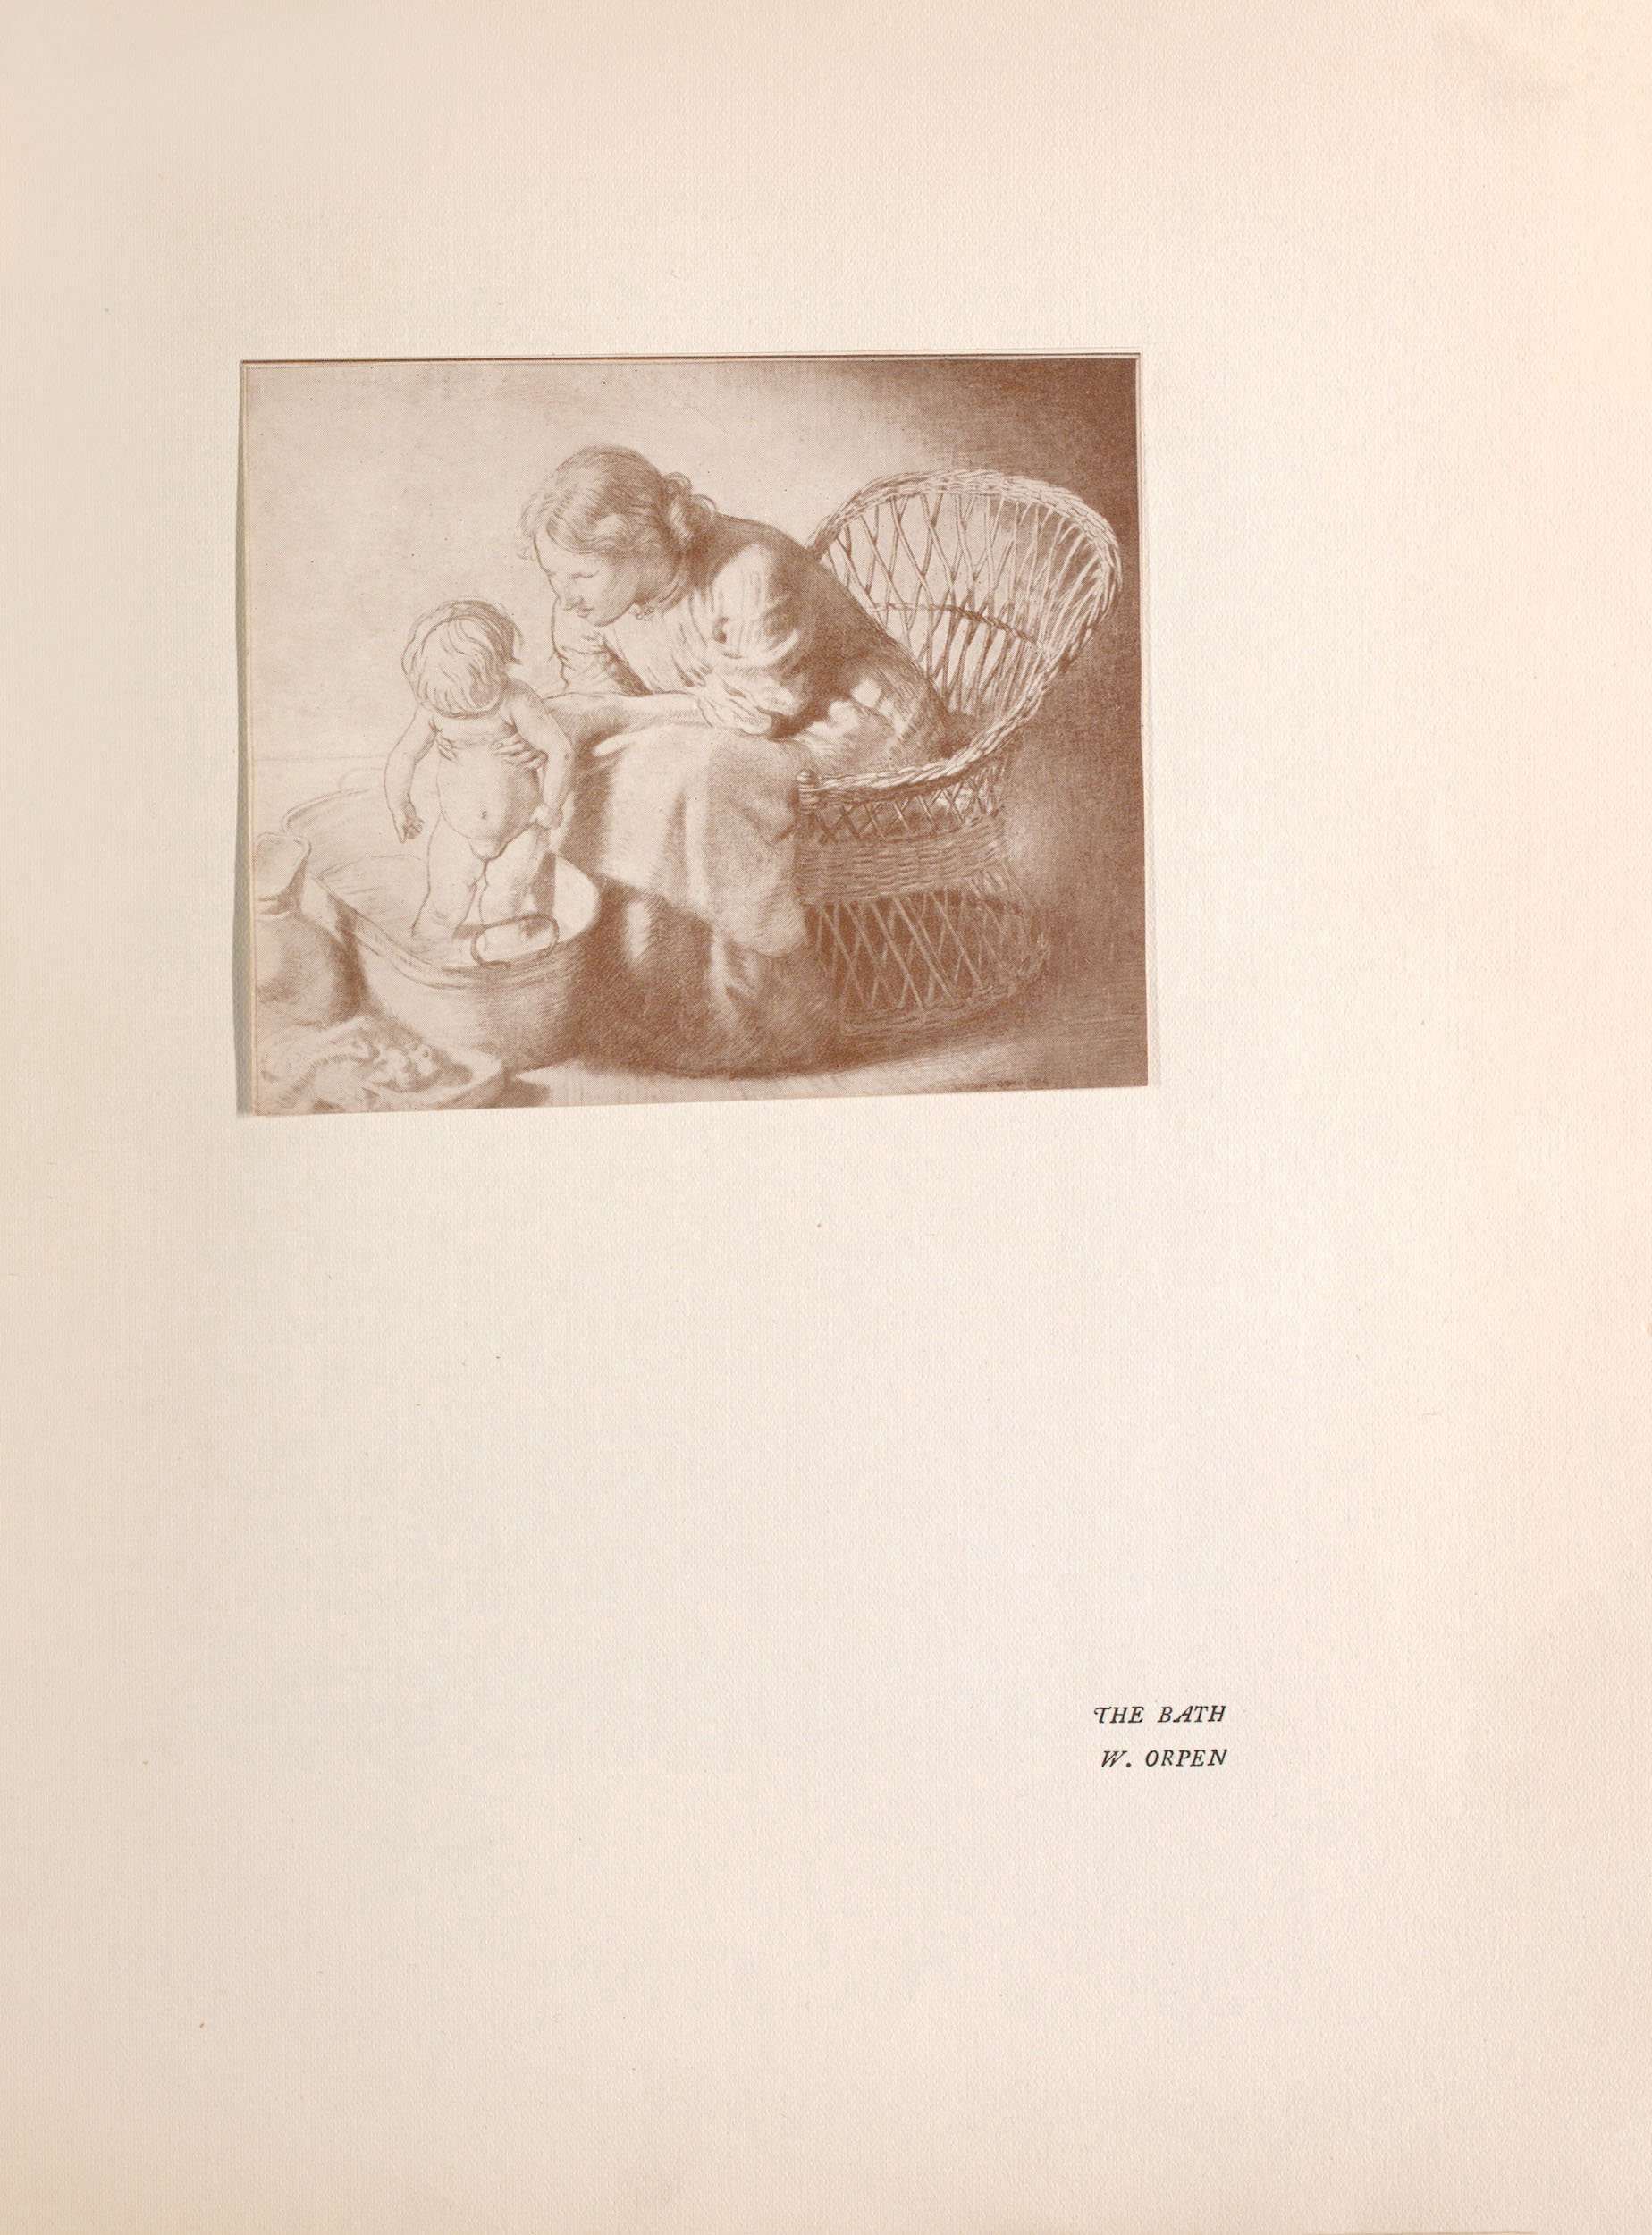 The image is in landscape orientation, tipped in the upper right section of the page, and printed in sepia tones. A young woman in left-profile is sitting on a wicker basket chair and bathing a small infant in a bucketl. The woman is wearing a light-coloured dress which covers her arms and legs. The sleeves are rolled up to her elbows and her forearms are exposed. A towel or piece of fabric on her lap covers her knees. Her hair is tied up loosely in a small bun at the nape of her neck. The woman is holding an infant by their underarms and is dipping their lower body in the bucket in front of her. On the floor beside the bucket is a pitcher and towel or blanket.. The drawing is signed “William Orpen” in the bottom right corner of the image.